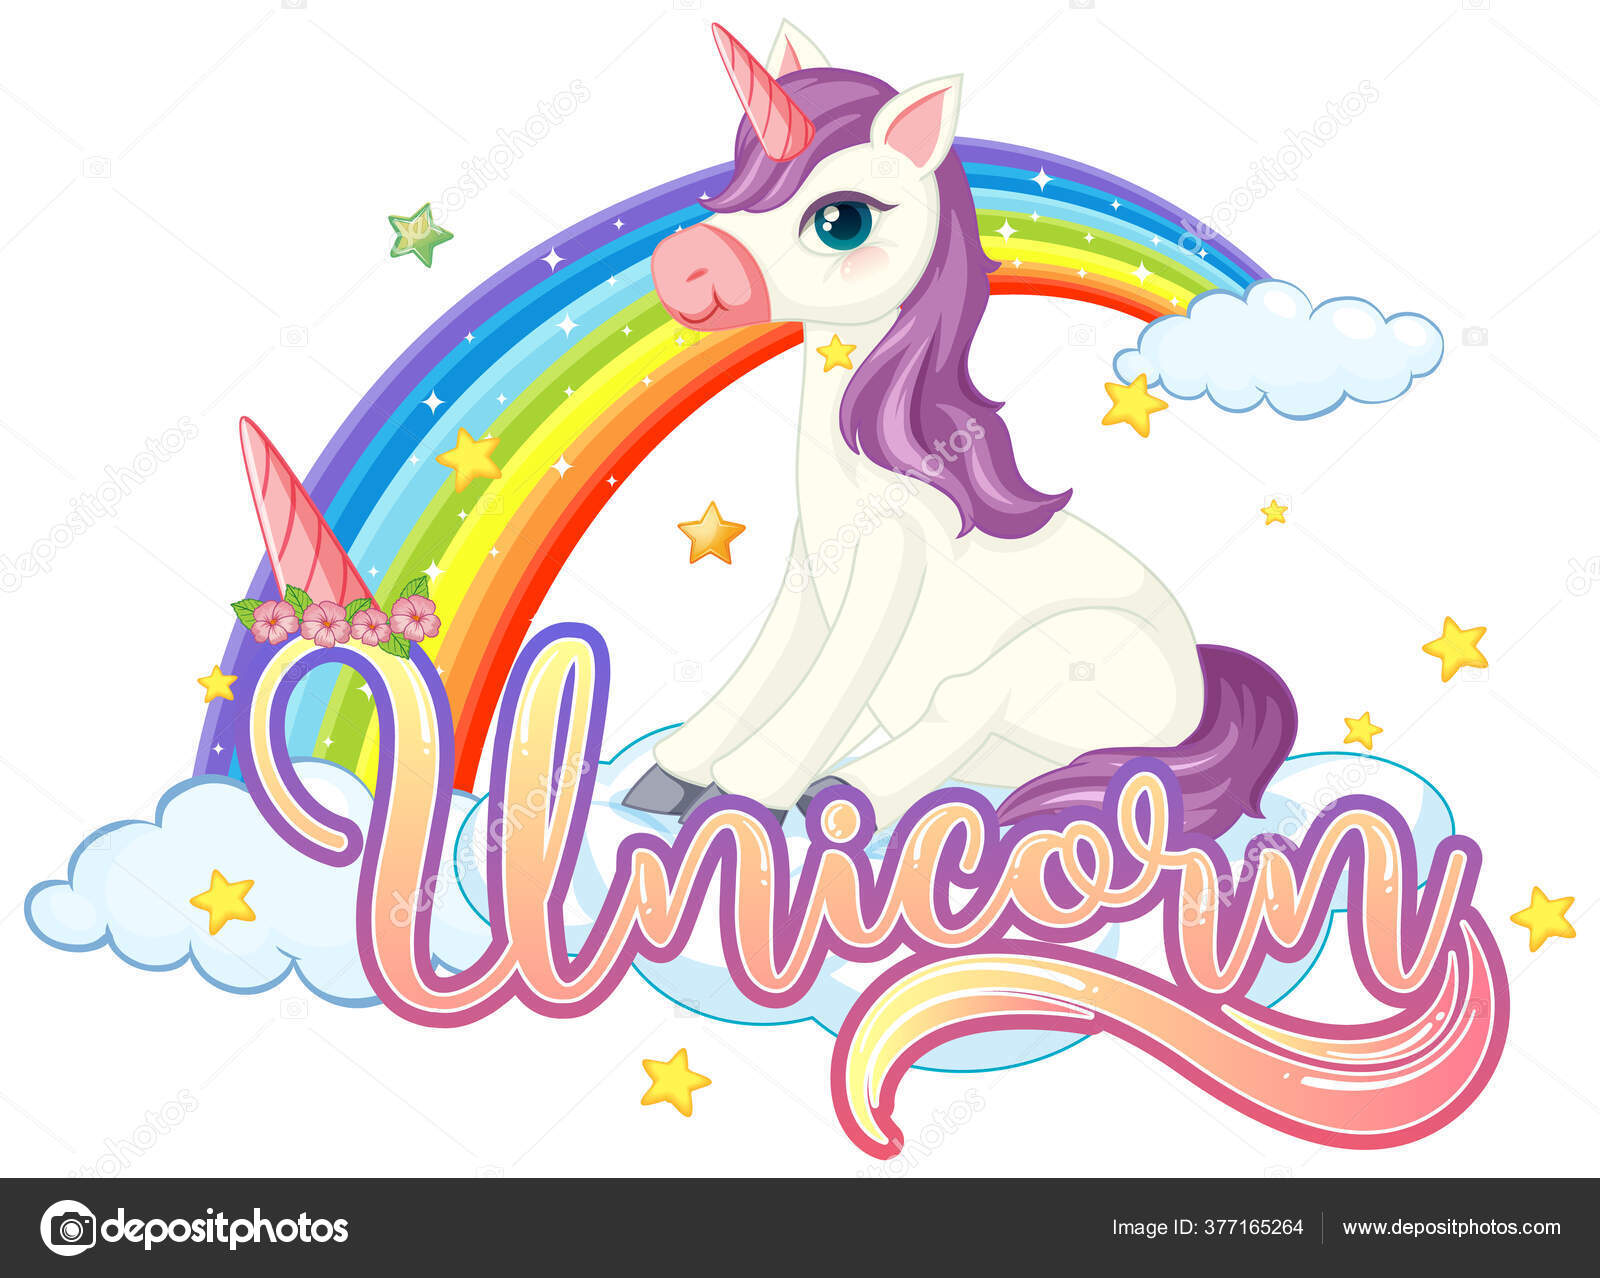 Cute Unicorn Unicorn Sign Illustration Vector Image By C Interactimages Vector Stock 377165264